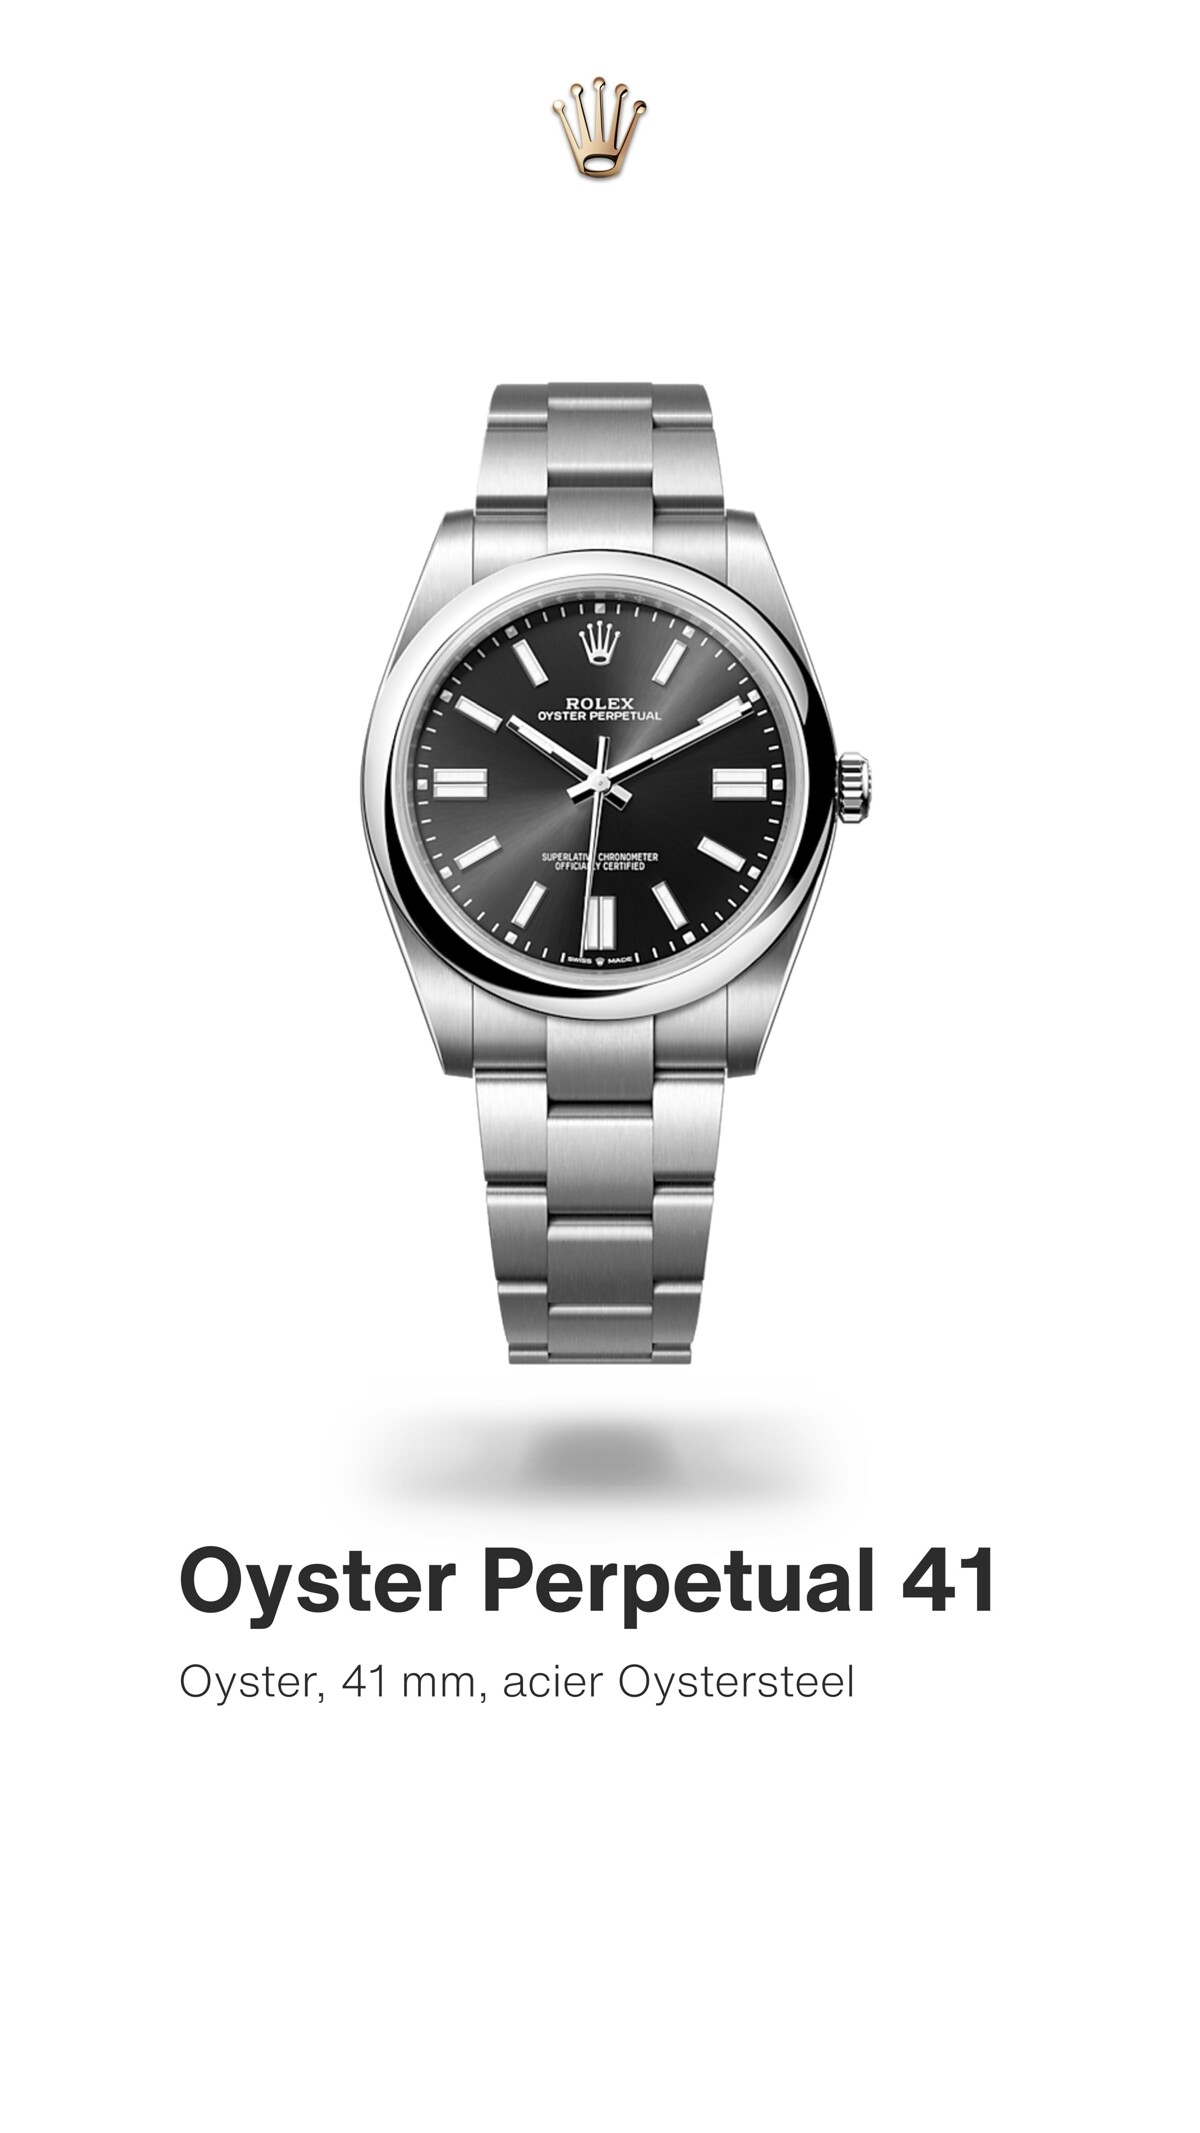 Catalogue Oyster-Perptual 41 - Rolex, page 00001